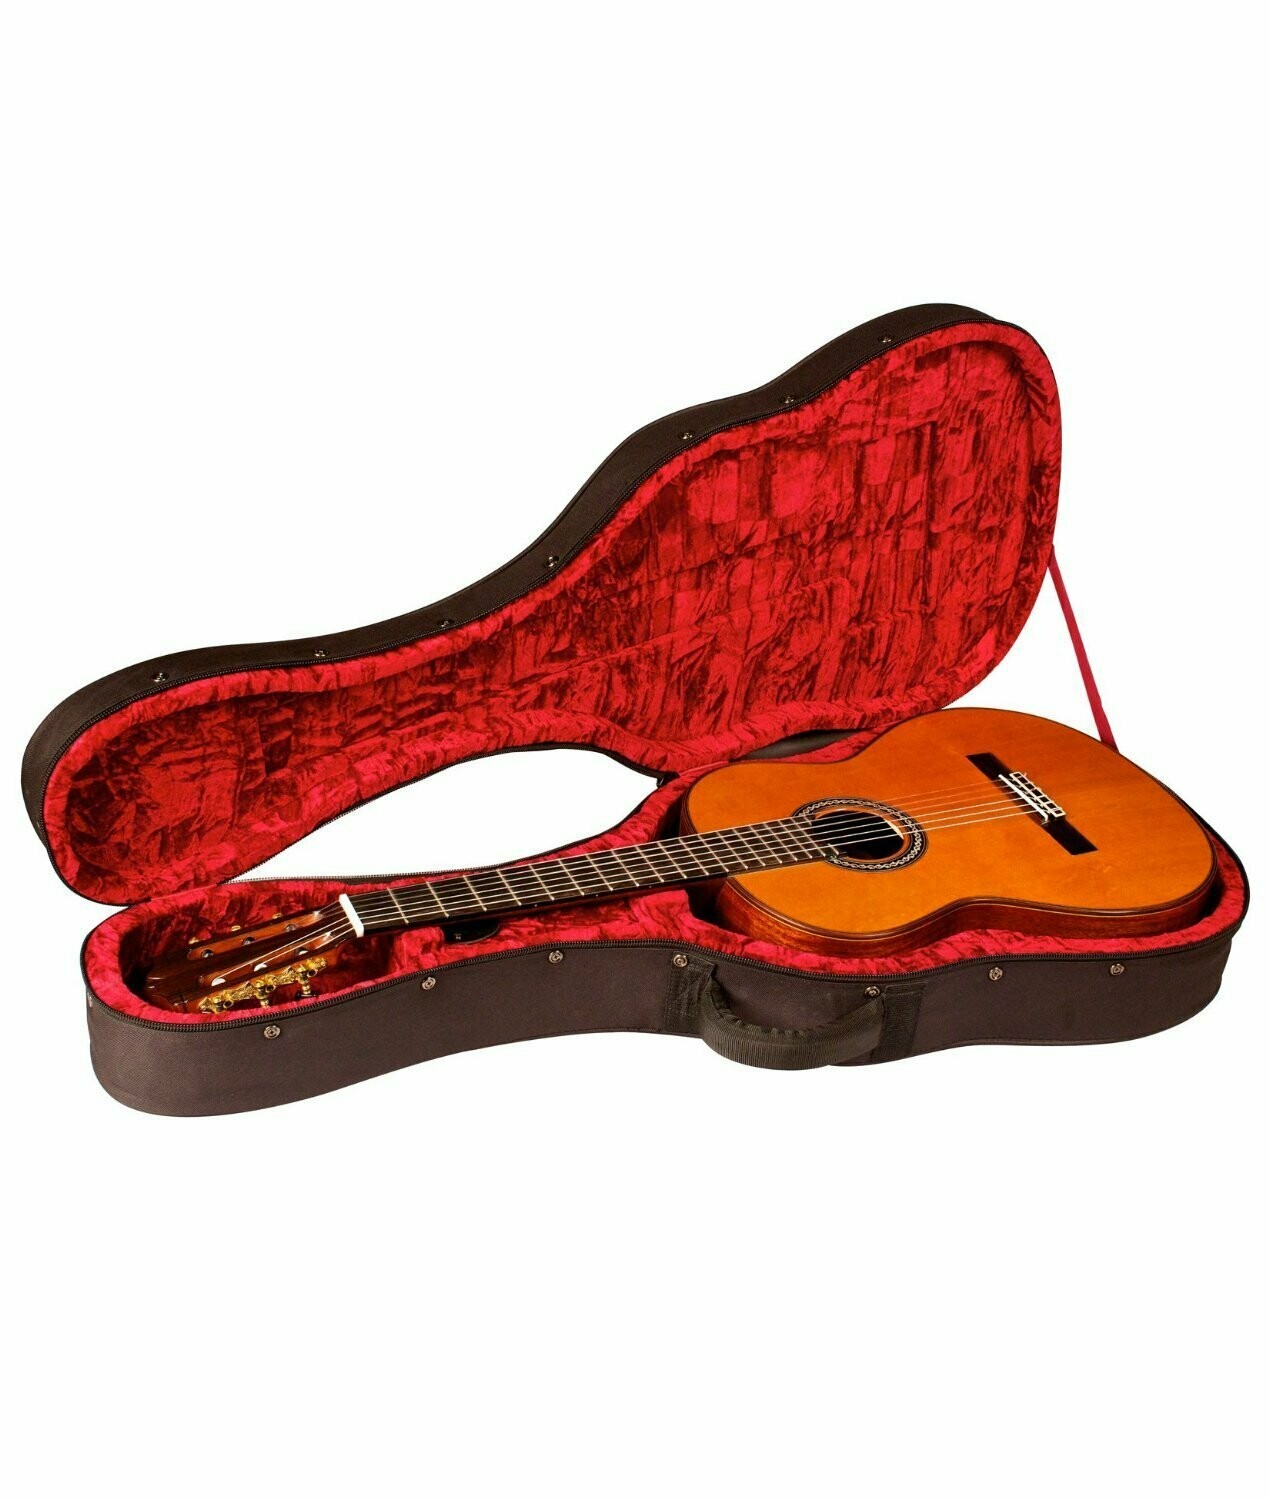 Cordoba C9 Parlor - ⅞ Size Guitar - 630mm Scale Length - Solid Cedar Top/  Solid Mahogany Back/Sides